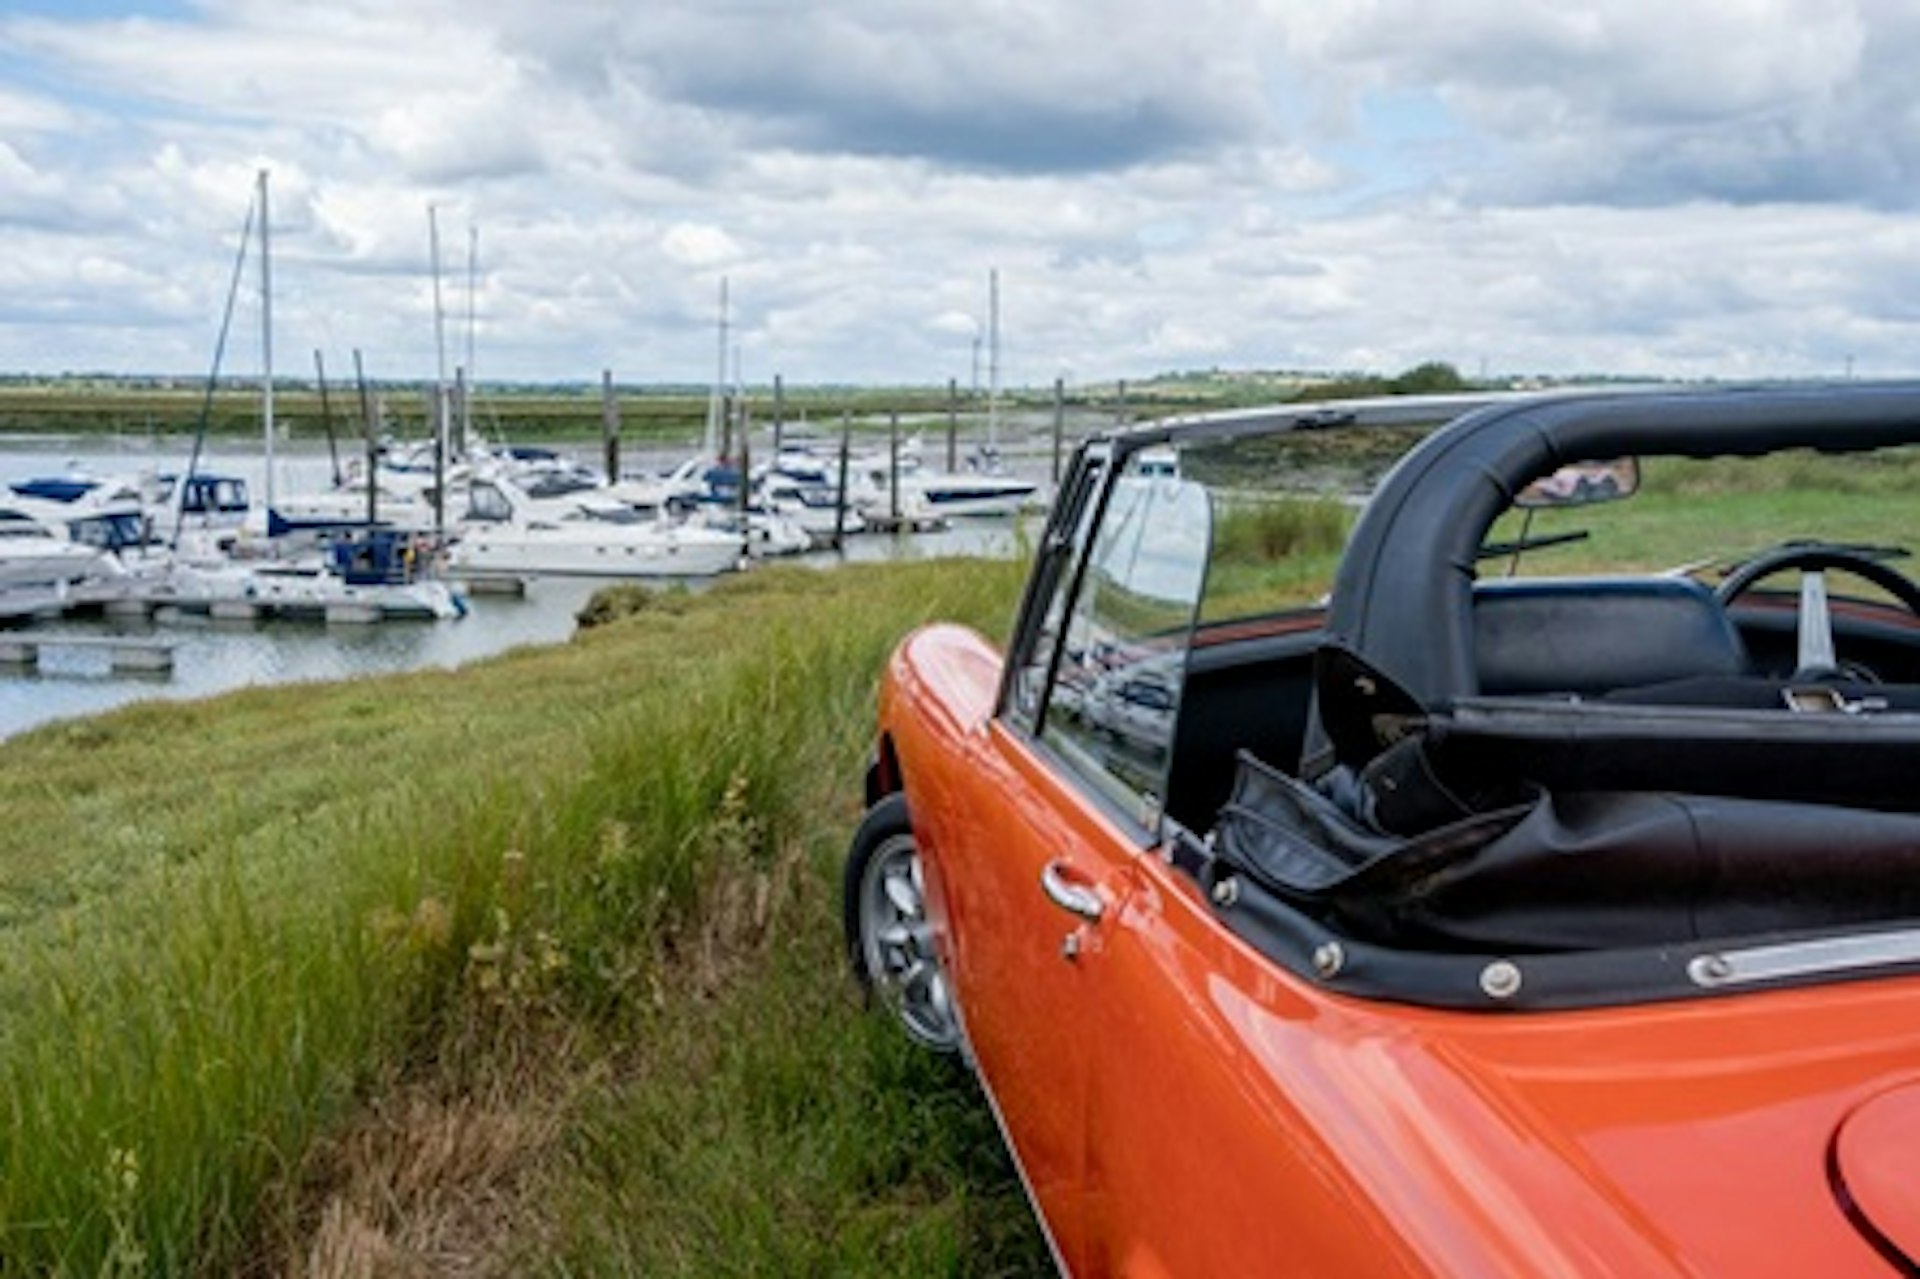 MG Midget Classic Car On Road Driving Experience - Weekday 2